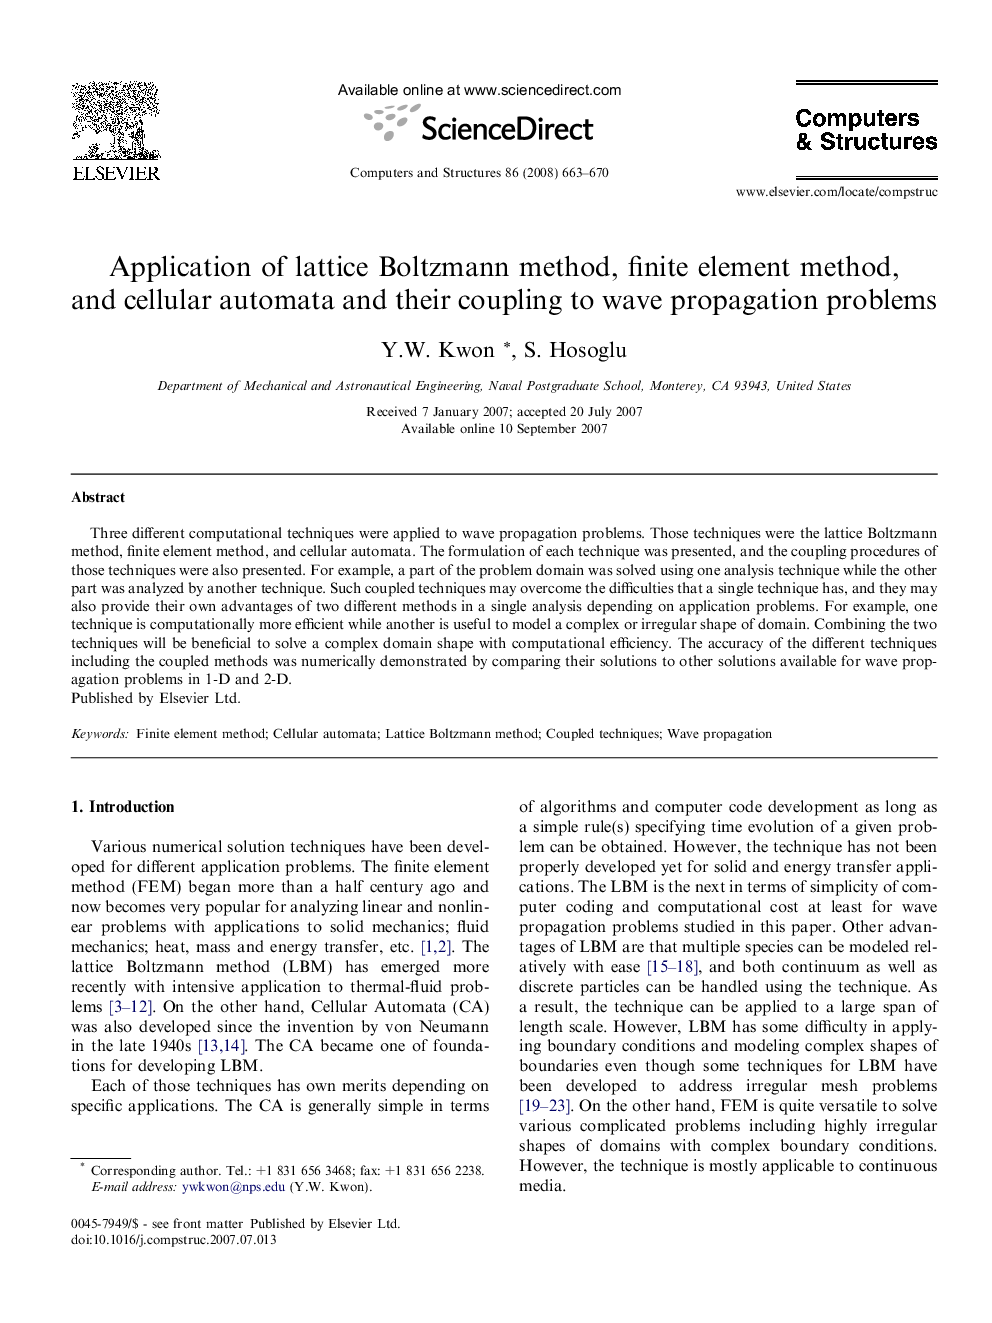 Application of lattice Boltzmann method, finite element method, and cellular automata and their coupling to wave propagation problems